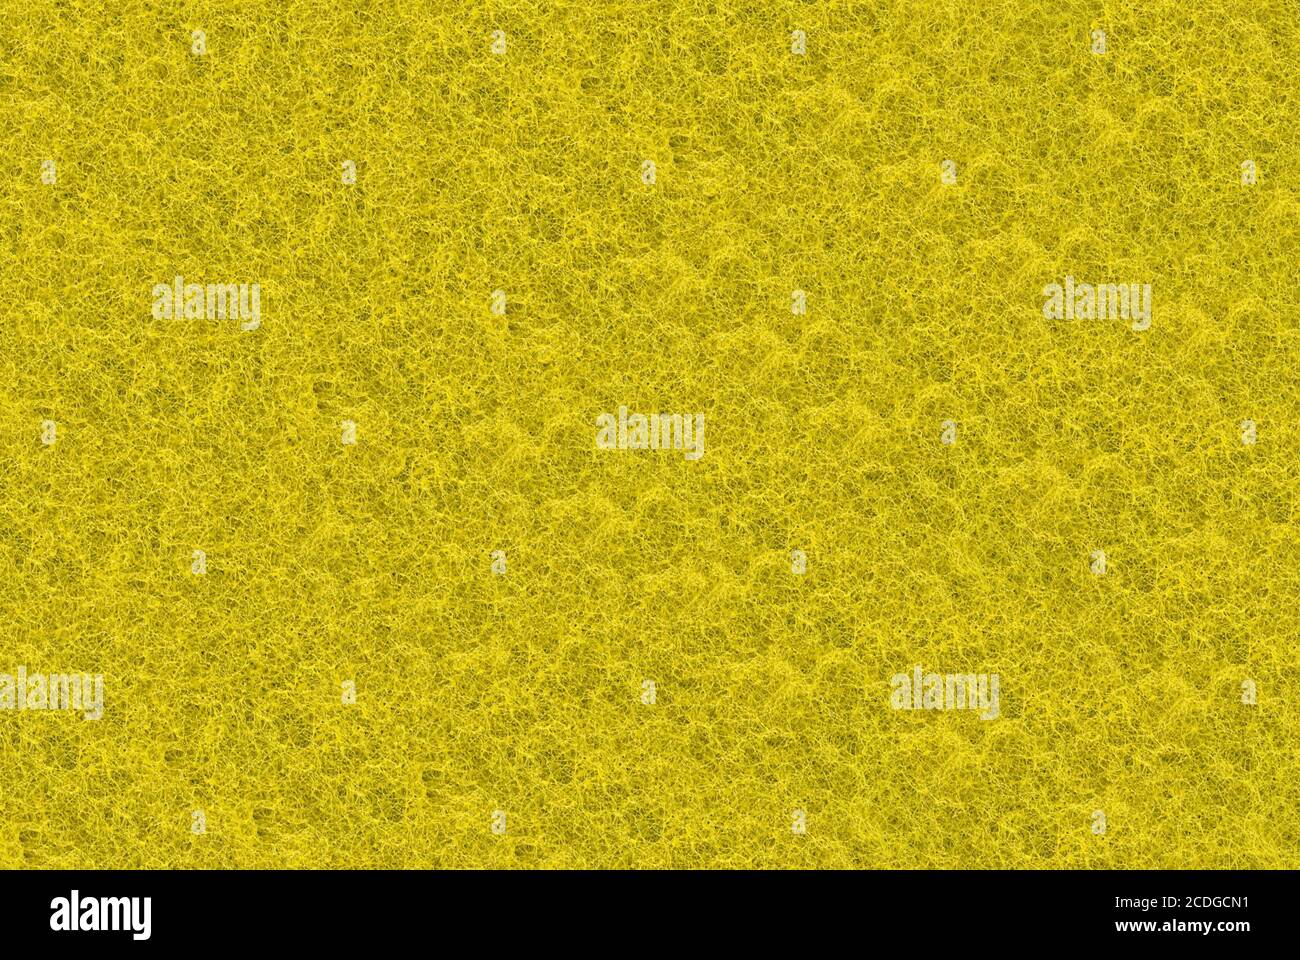 Close-up of yellow synthetic fibrous surface Stock Photo